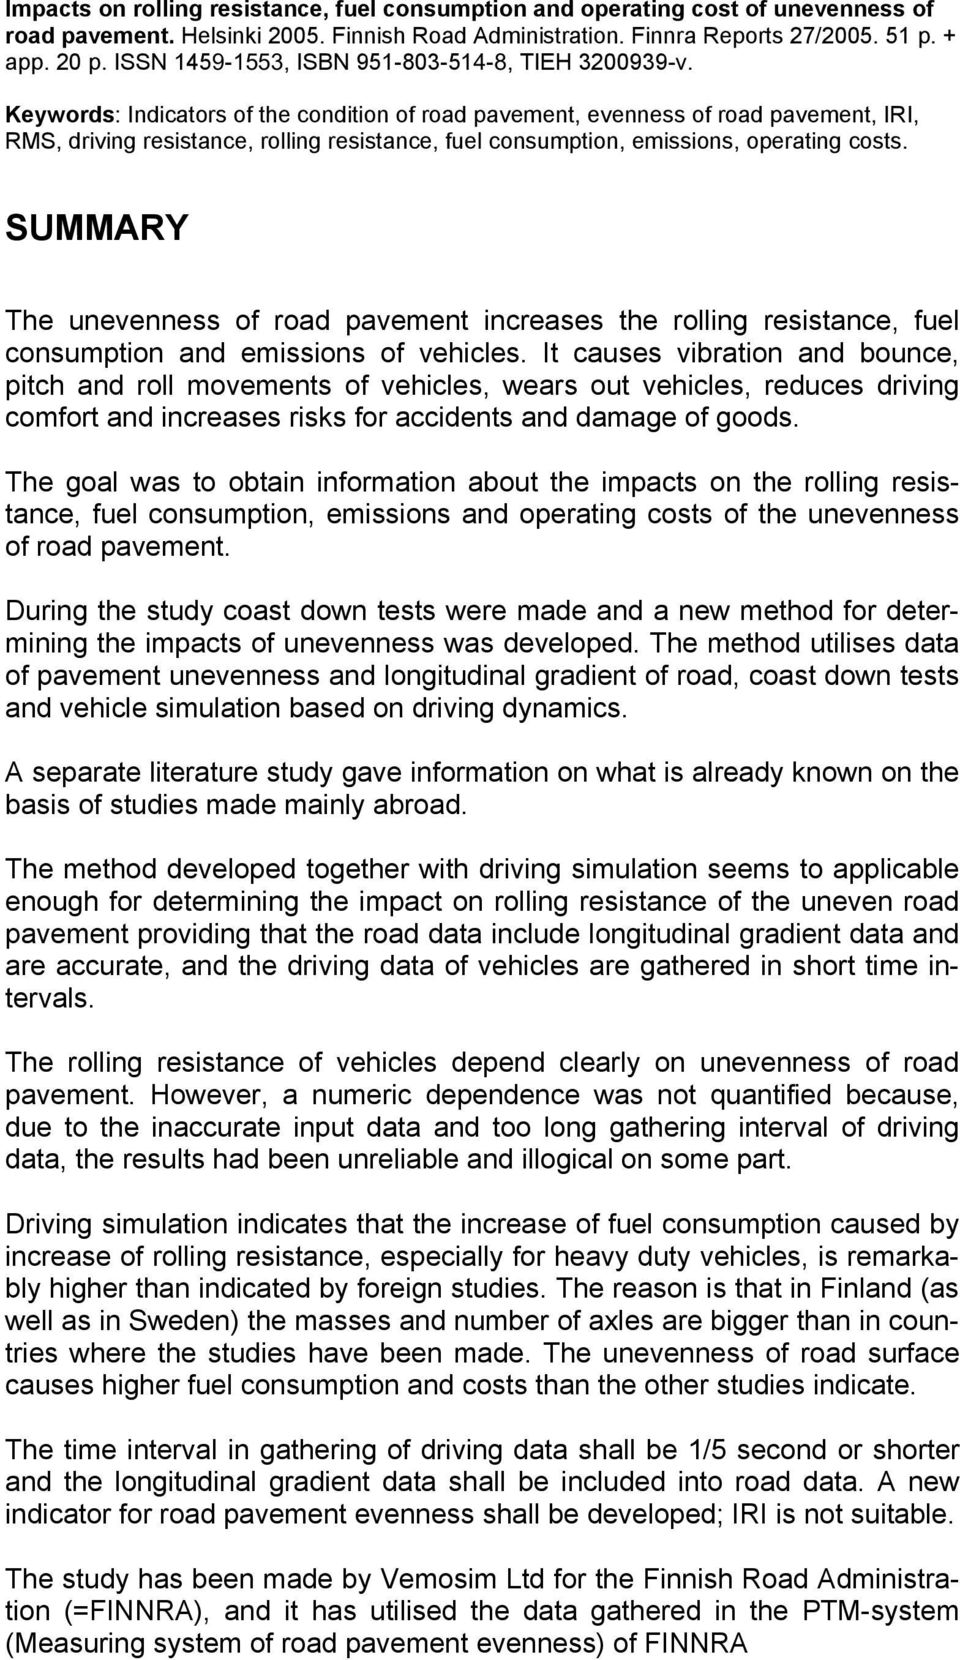 Keywords: Indicators of the condition of road pavement, evenness of road pavement, IRI, RMS, driving resistance, rolling resistance, fuel consumption, emissions, operating costs.